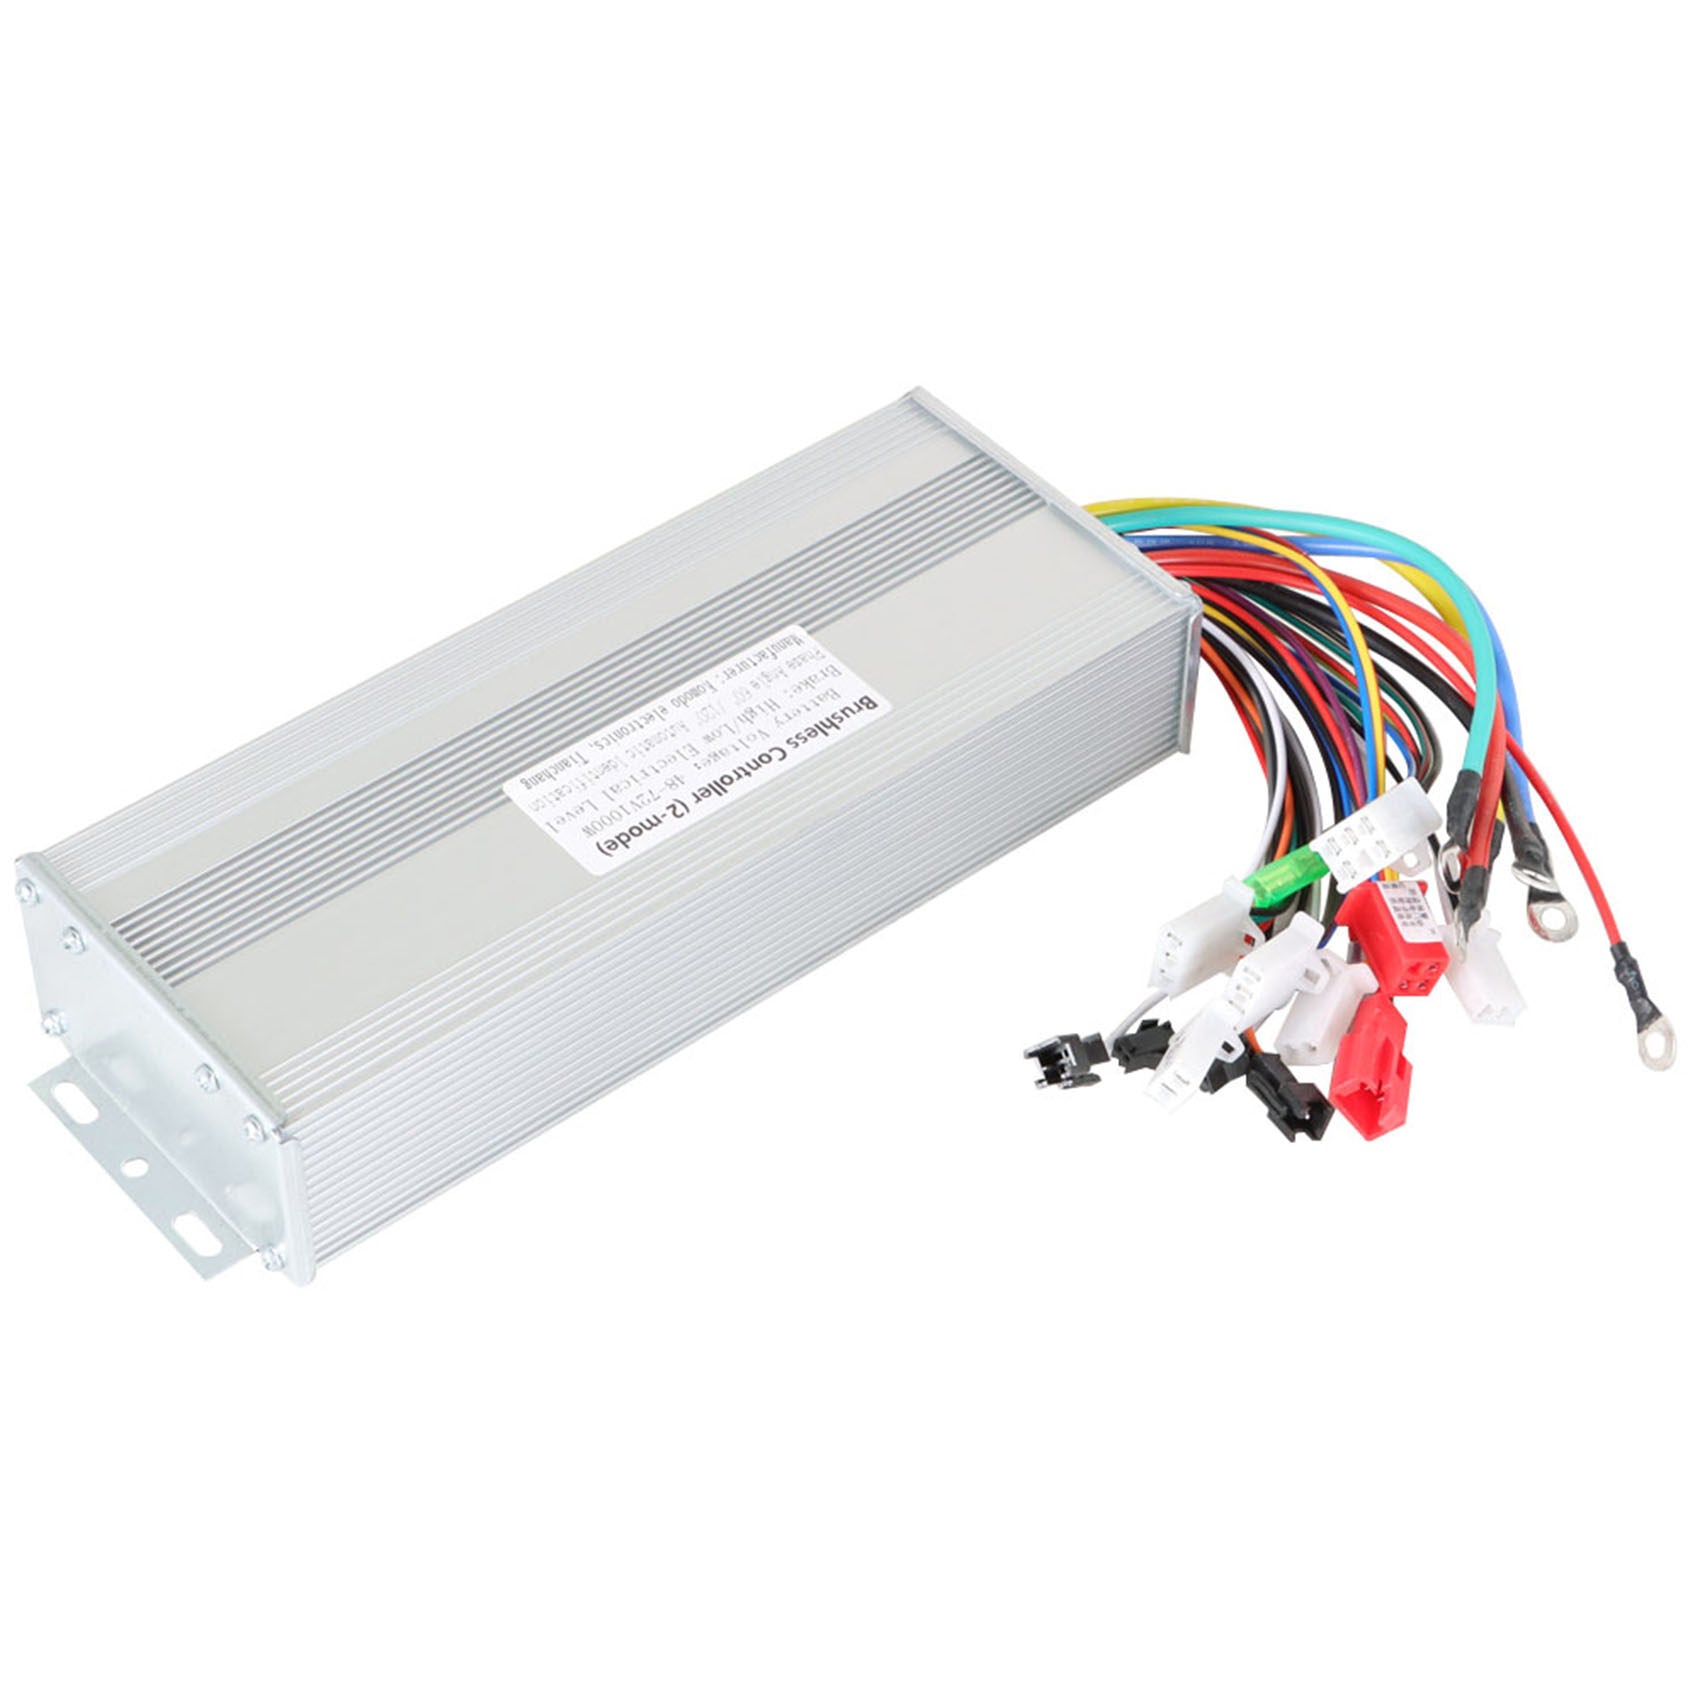 munirater 48-72V 1000W Brushless DC Motor Speed Controller Replacement for Electric Bicycle E-bike Scooter